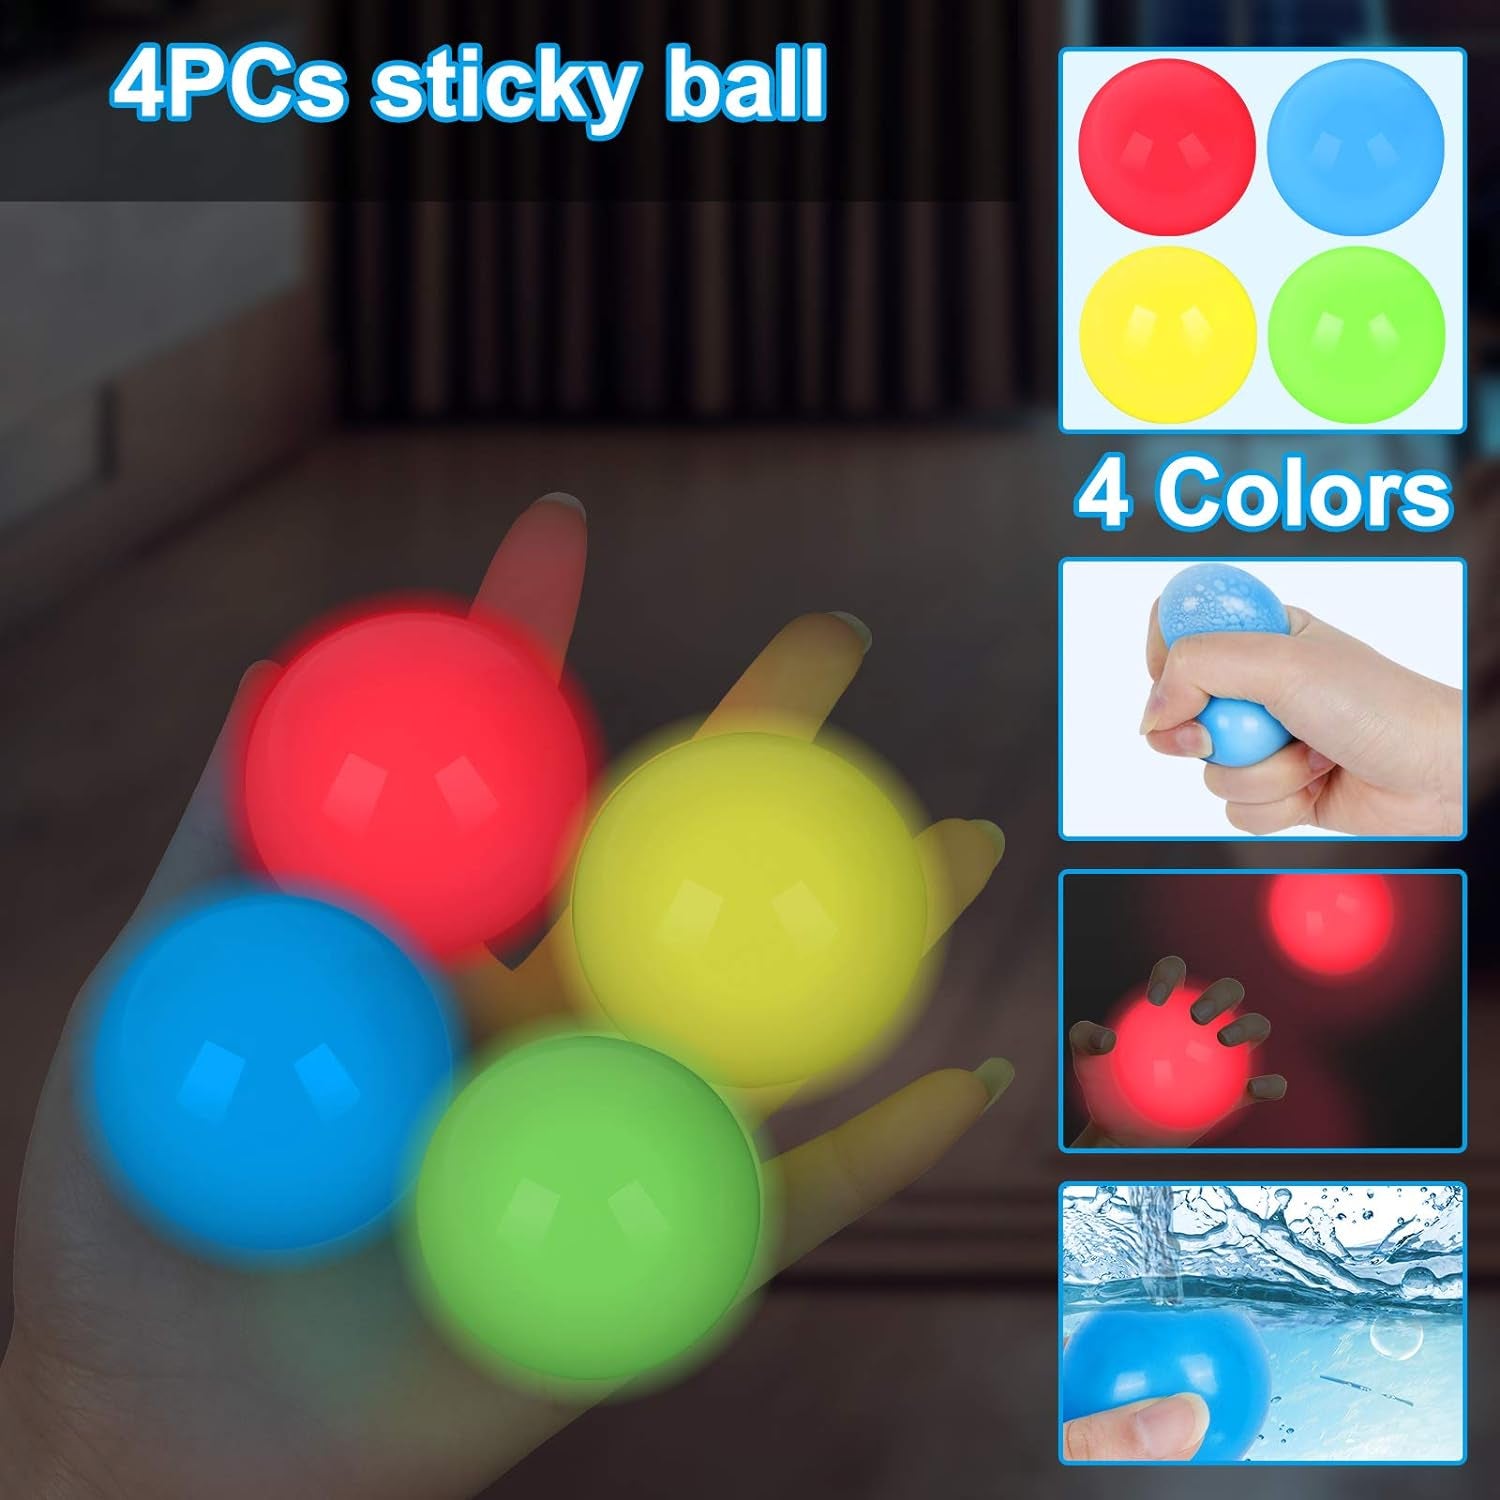 Sticky Ceiling Balls, Sticky Balls for Ceiling, Stress Relief Glow Toys Glow in the Dark, Sticky Wall Balls Stuck on the Roof, Tear-Resistant, for Children and Adults